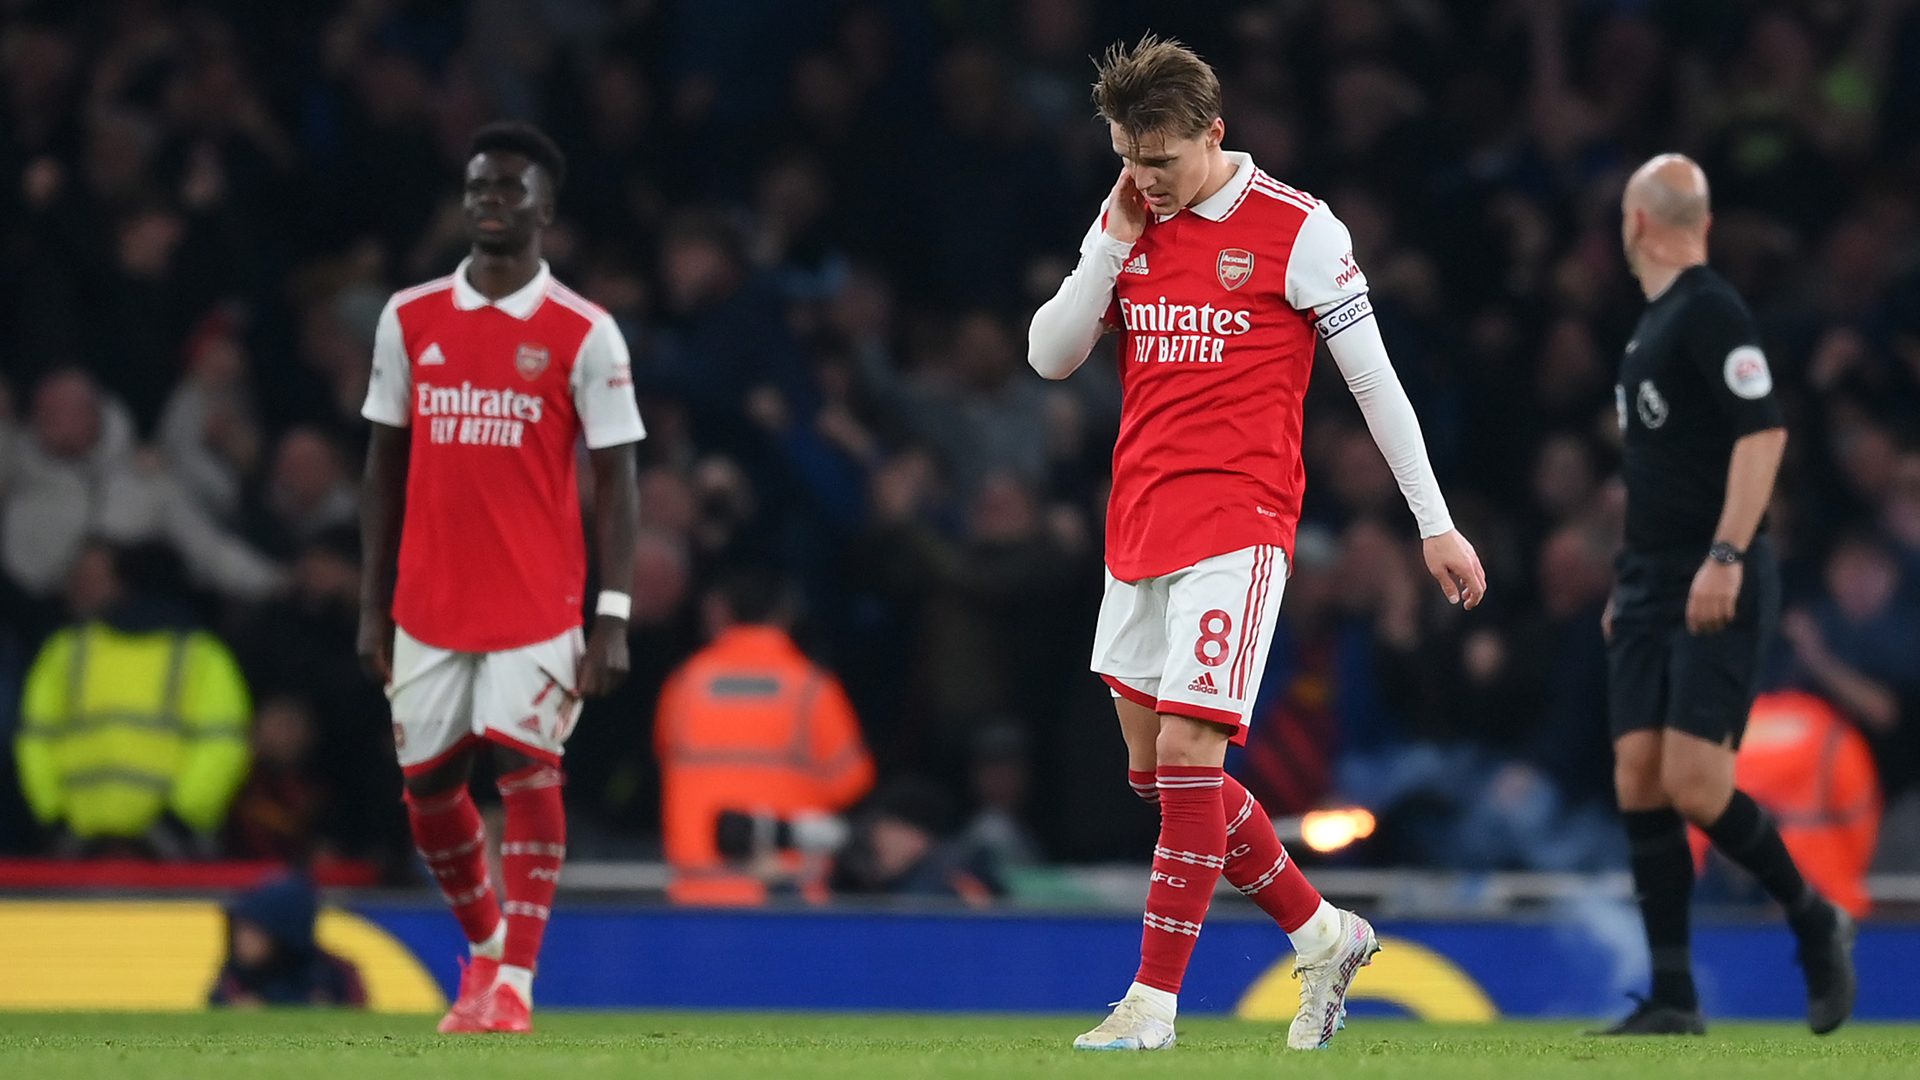 Martin Odegaard of Arsenal looks dejected during the Premier League match between Arsenal FC and Manchester City at Emirates Stadium on February 15, 2023 in London, England.